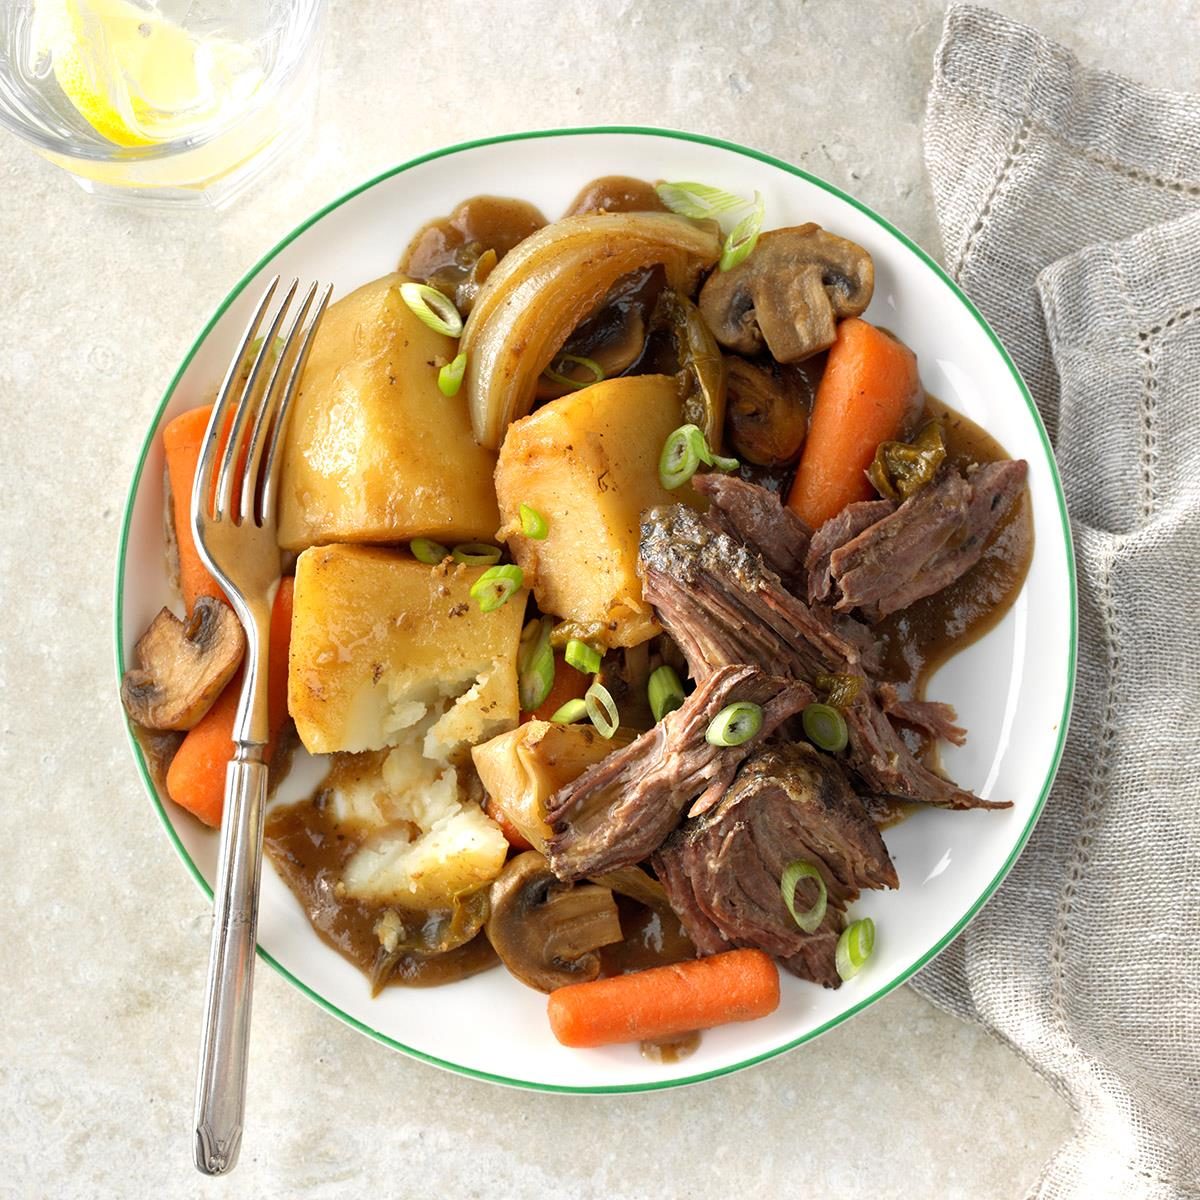 <p>My father and I created this pot roast with a hint of Japanese flair. It will make your taste buds dance! try this for family or company. —Mary Flurkey, Golden, Colorado</p> <div class="listicle-page__buttons"> <div class="listicle-page__cta-button"><a href='https://www.tasteofhome.com/recipes/teriyaki-beef-roast/'>Go to Recipe</a></div> </div>